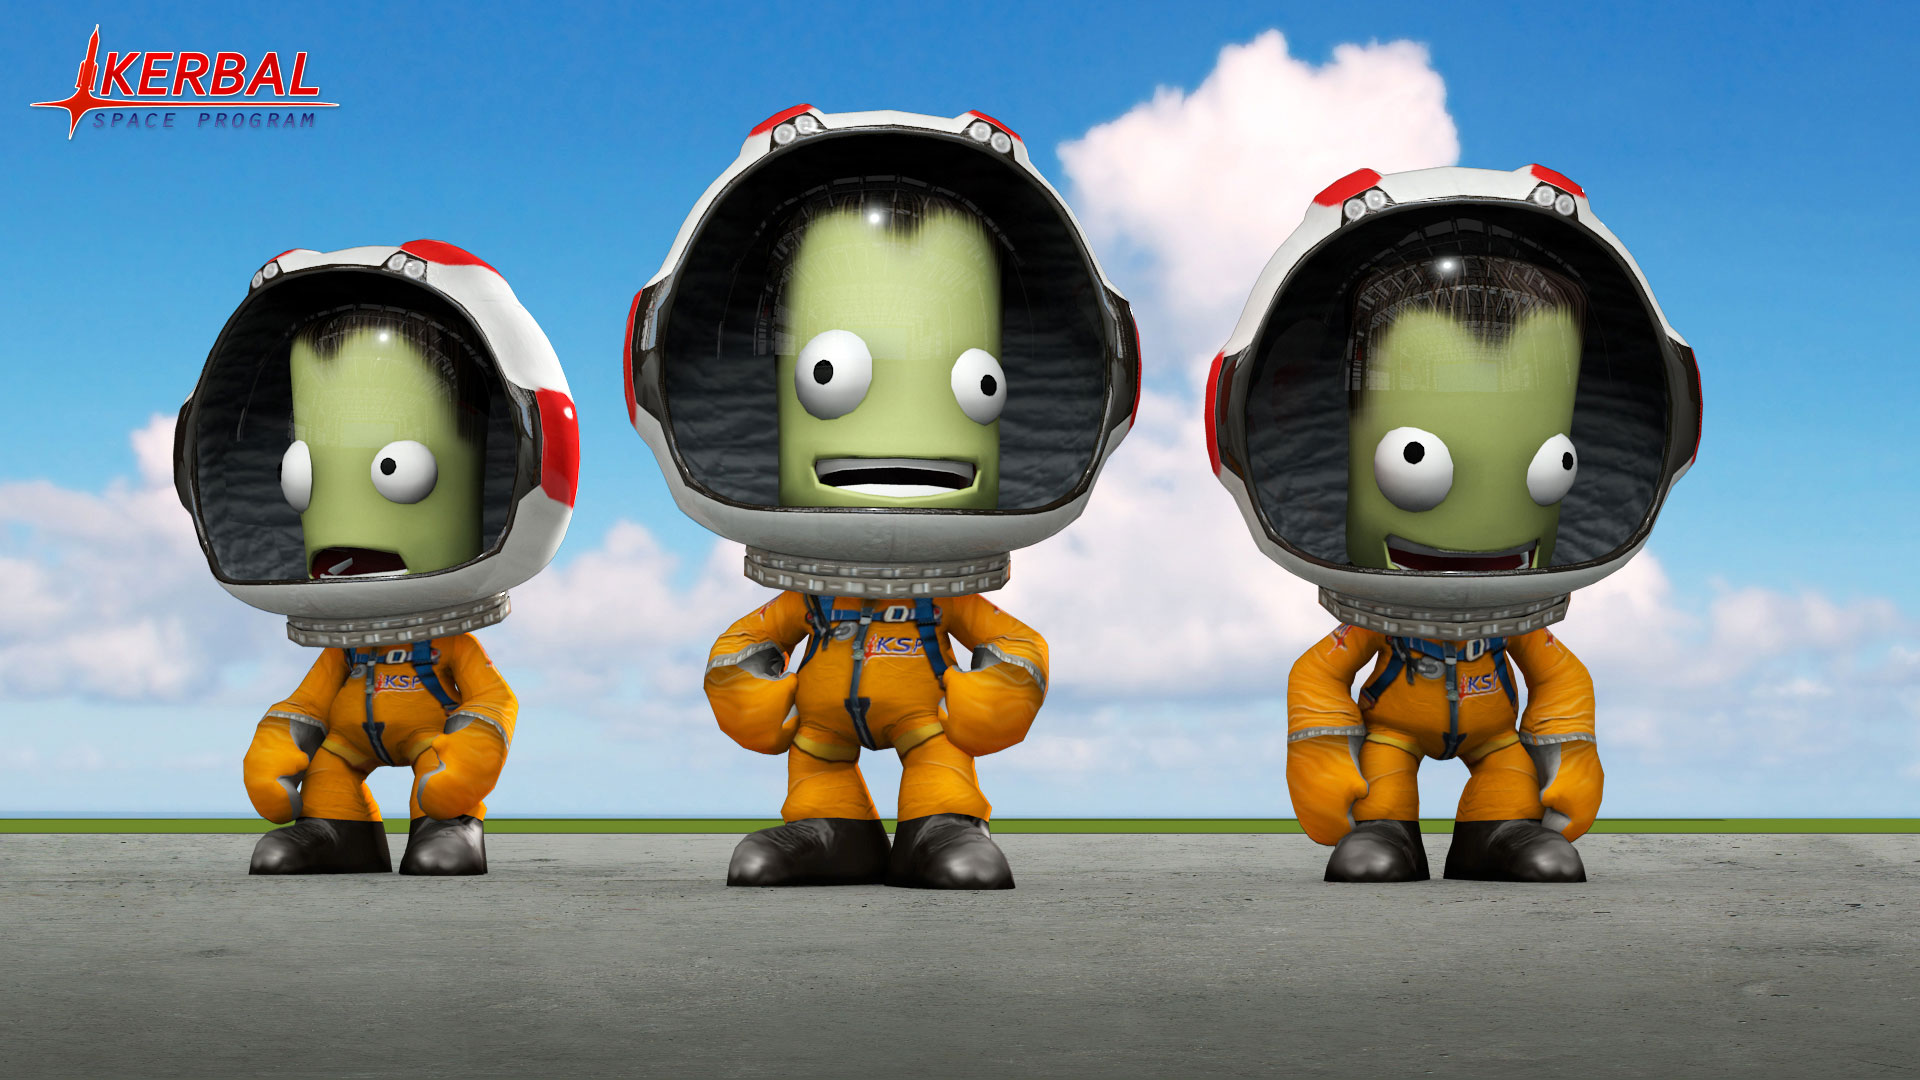 Jebediah, Bob, Bill, and Valentina are the Original Four astronauts in Kerbal, but you can create your own too. Credit: Squad, Monkey Squad S.A de C.V.